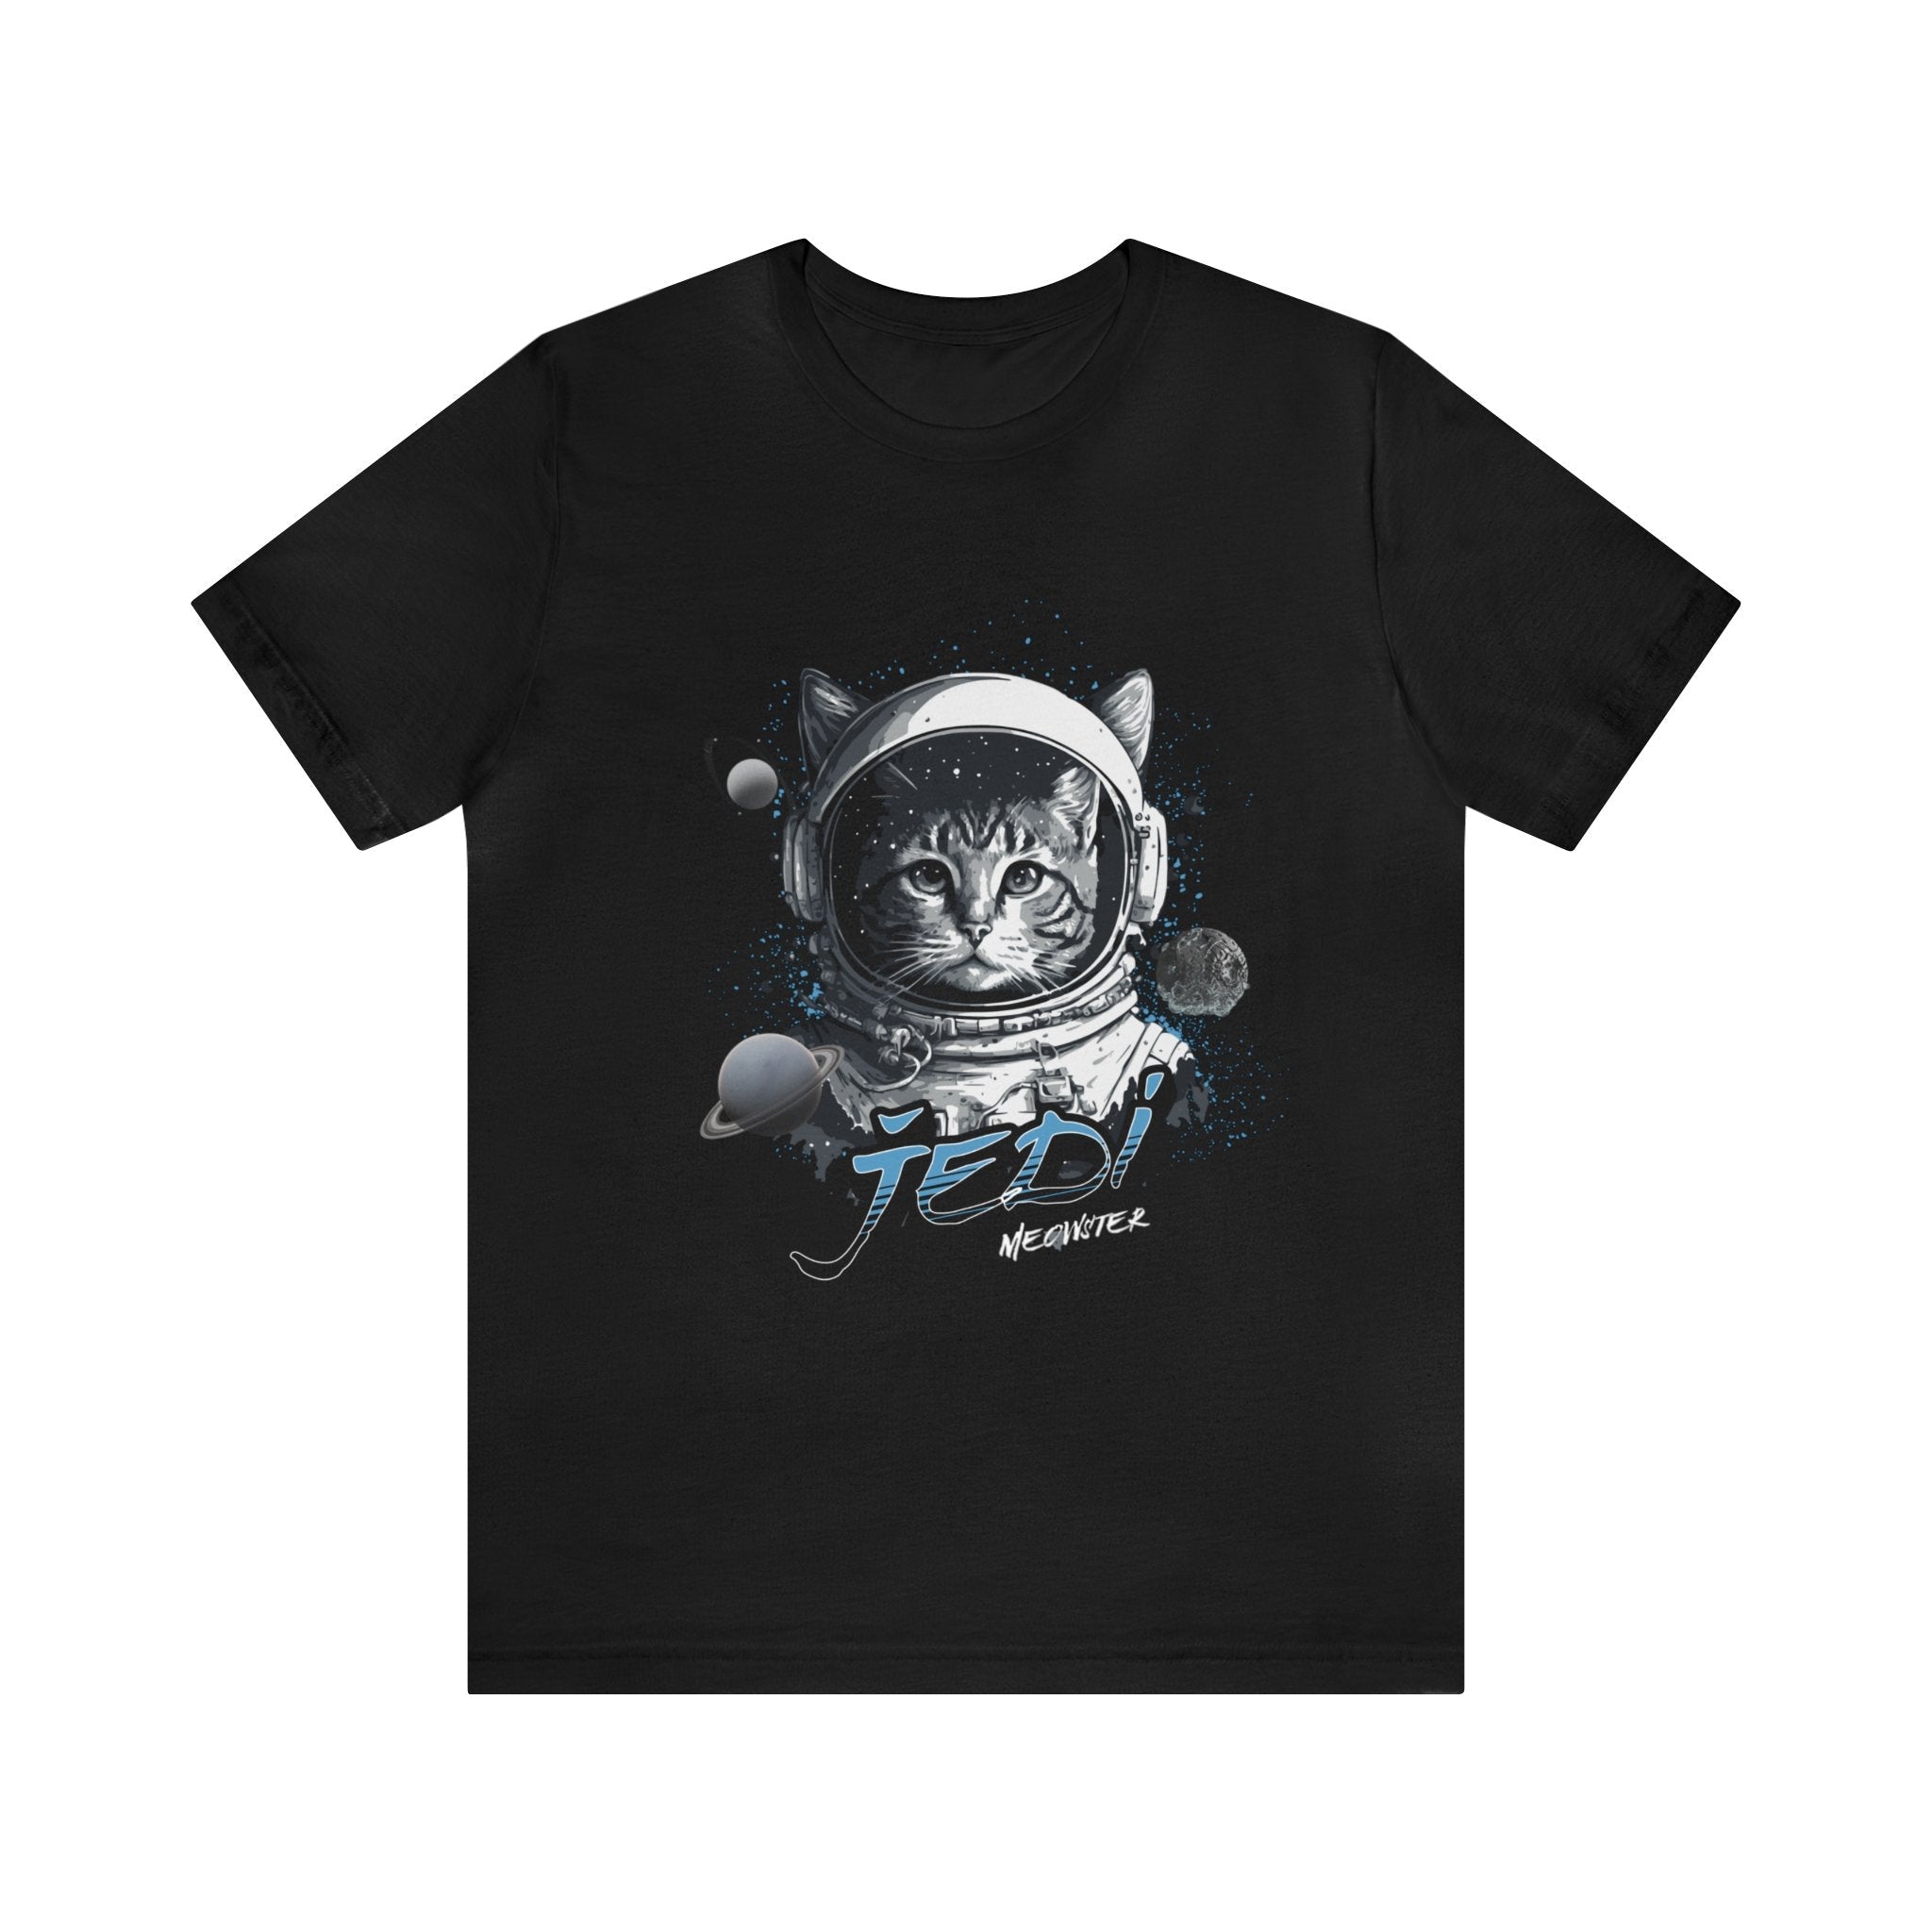 Jedi Meowster Unisex Tee: Purr-fect Force Fashion for Cat Lovers - MTL Dynamic StylesT-Shirt